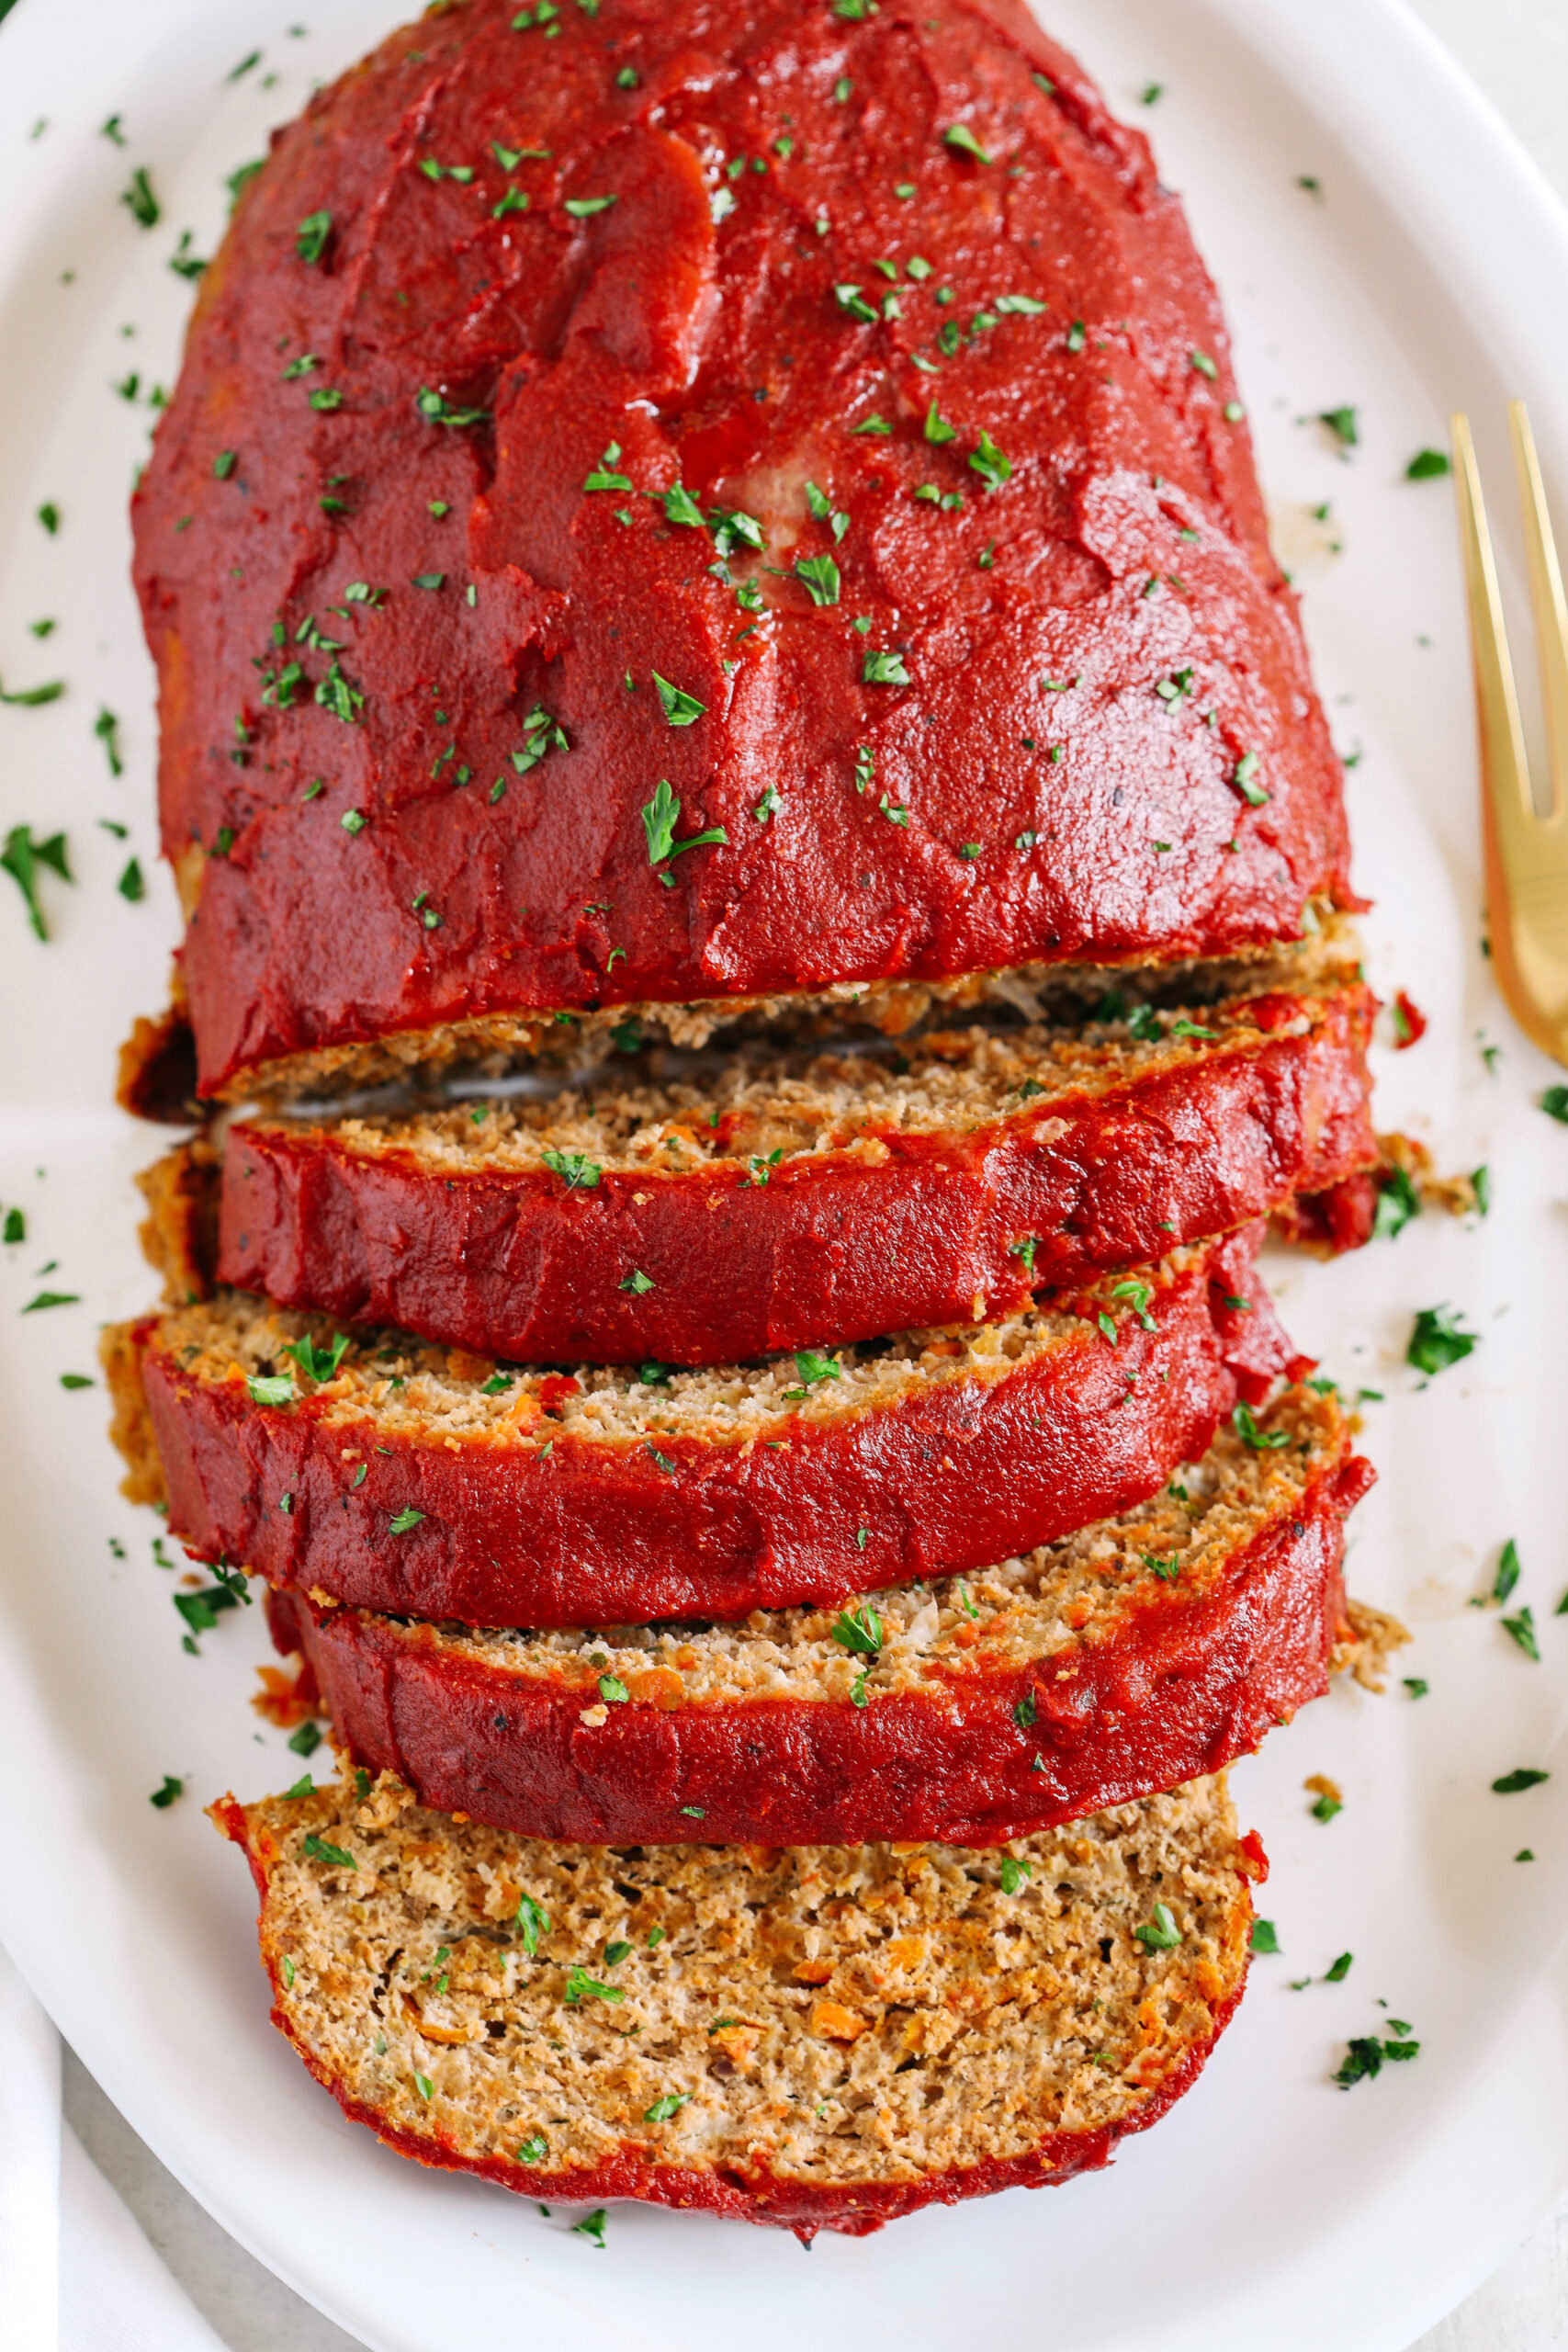 The BEST Healthy Turkey Meatloaf that is moist, super flavorful, and packed with hidden veggies all topped with a delicious tomato glaze!